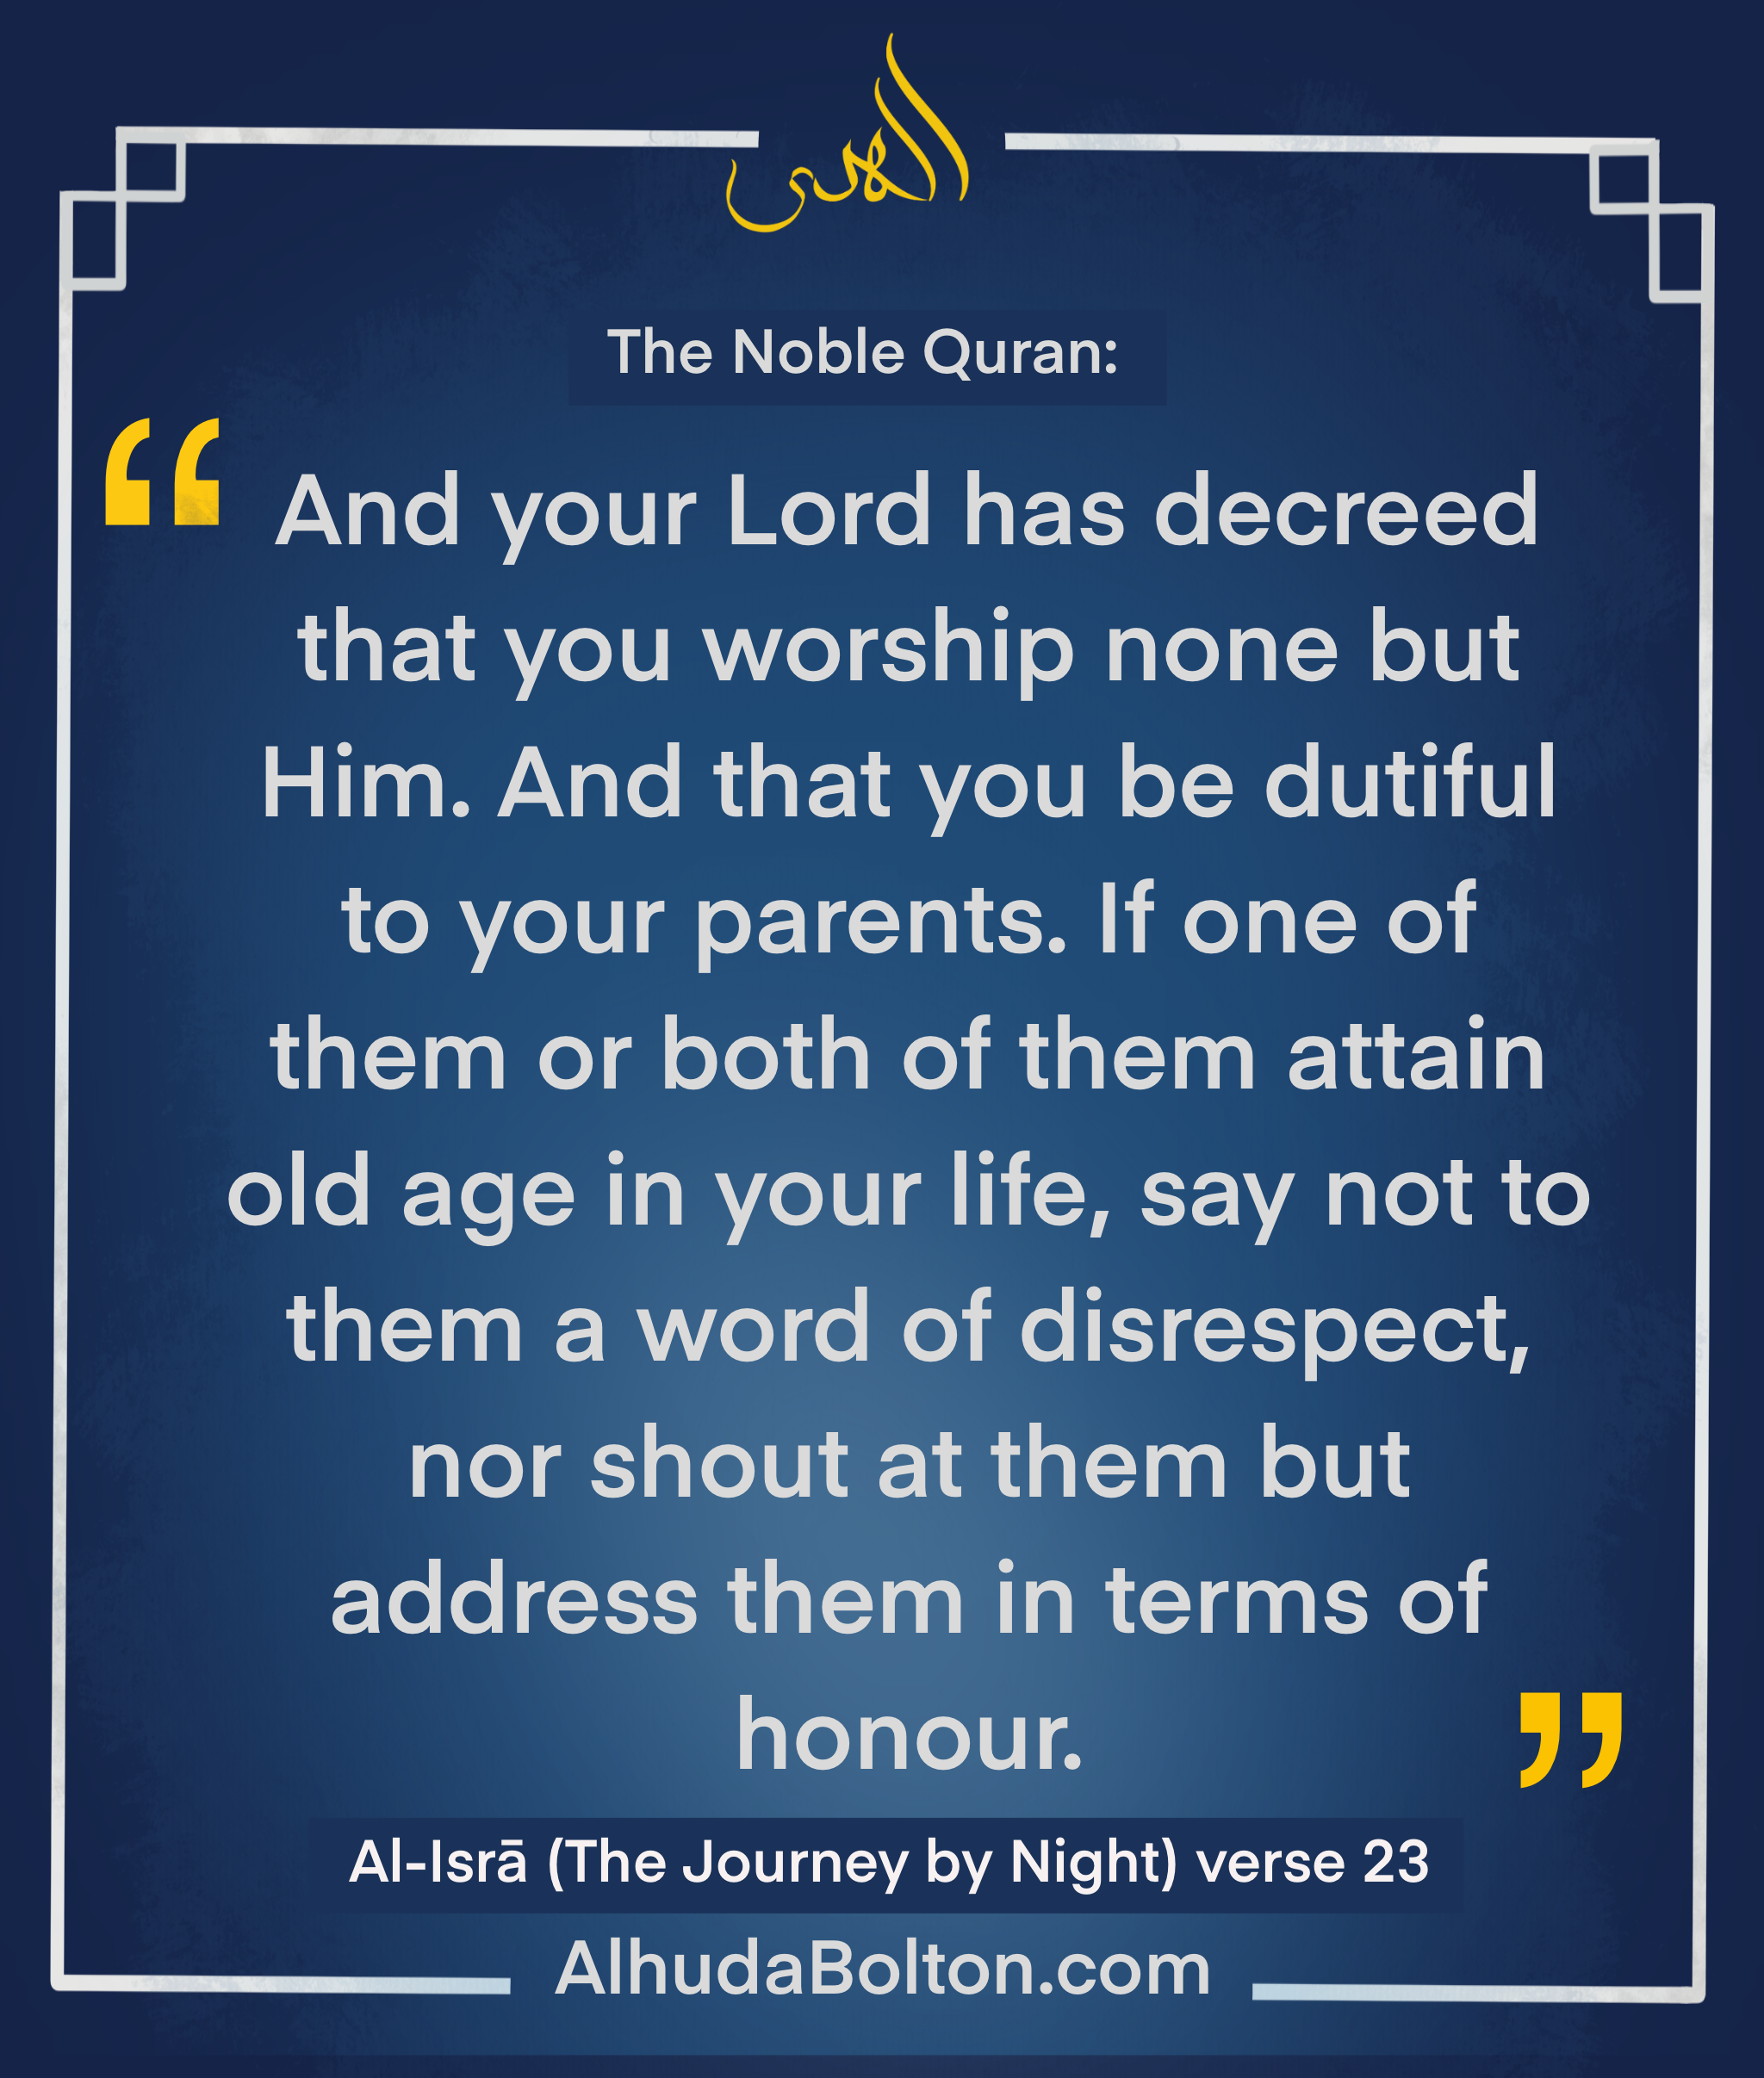 Quran Verse: “…and that you be dutiful to your parents”